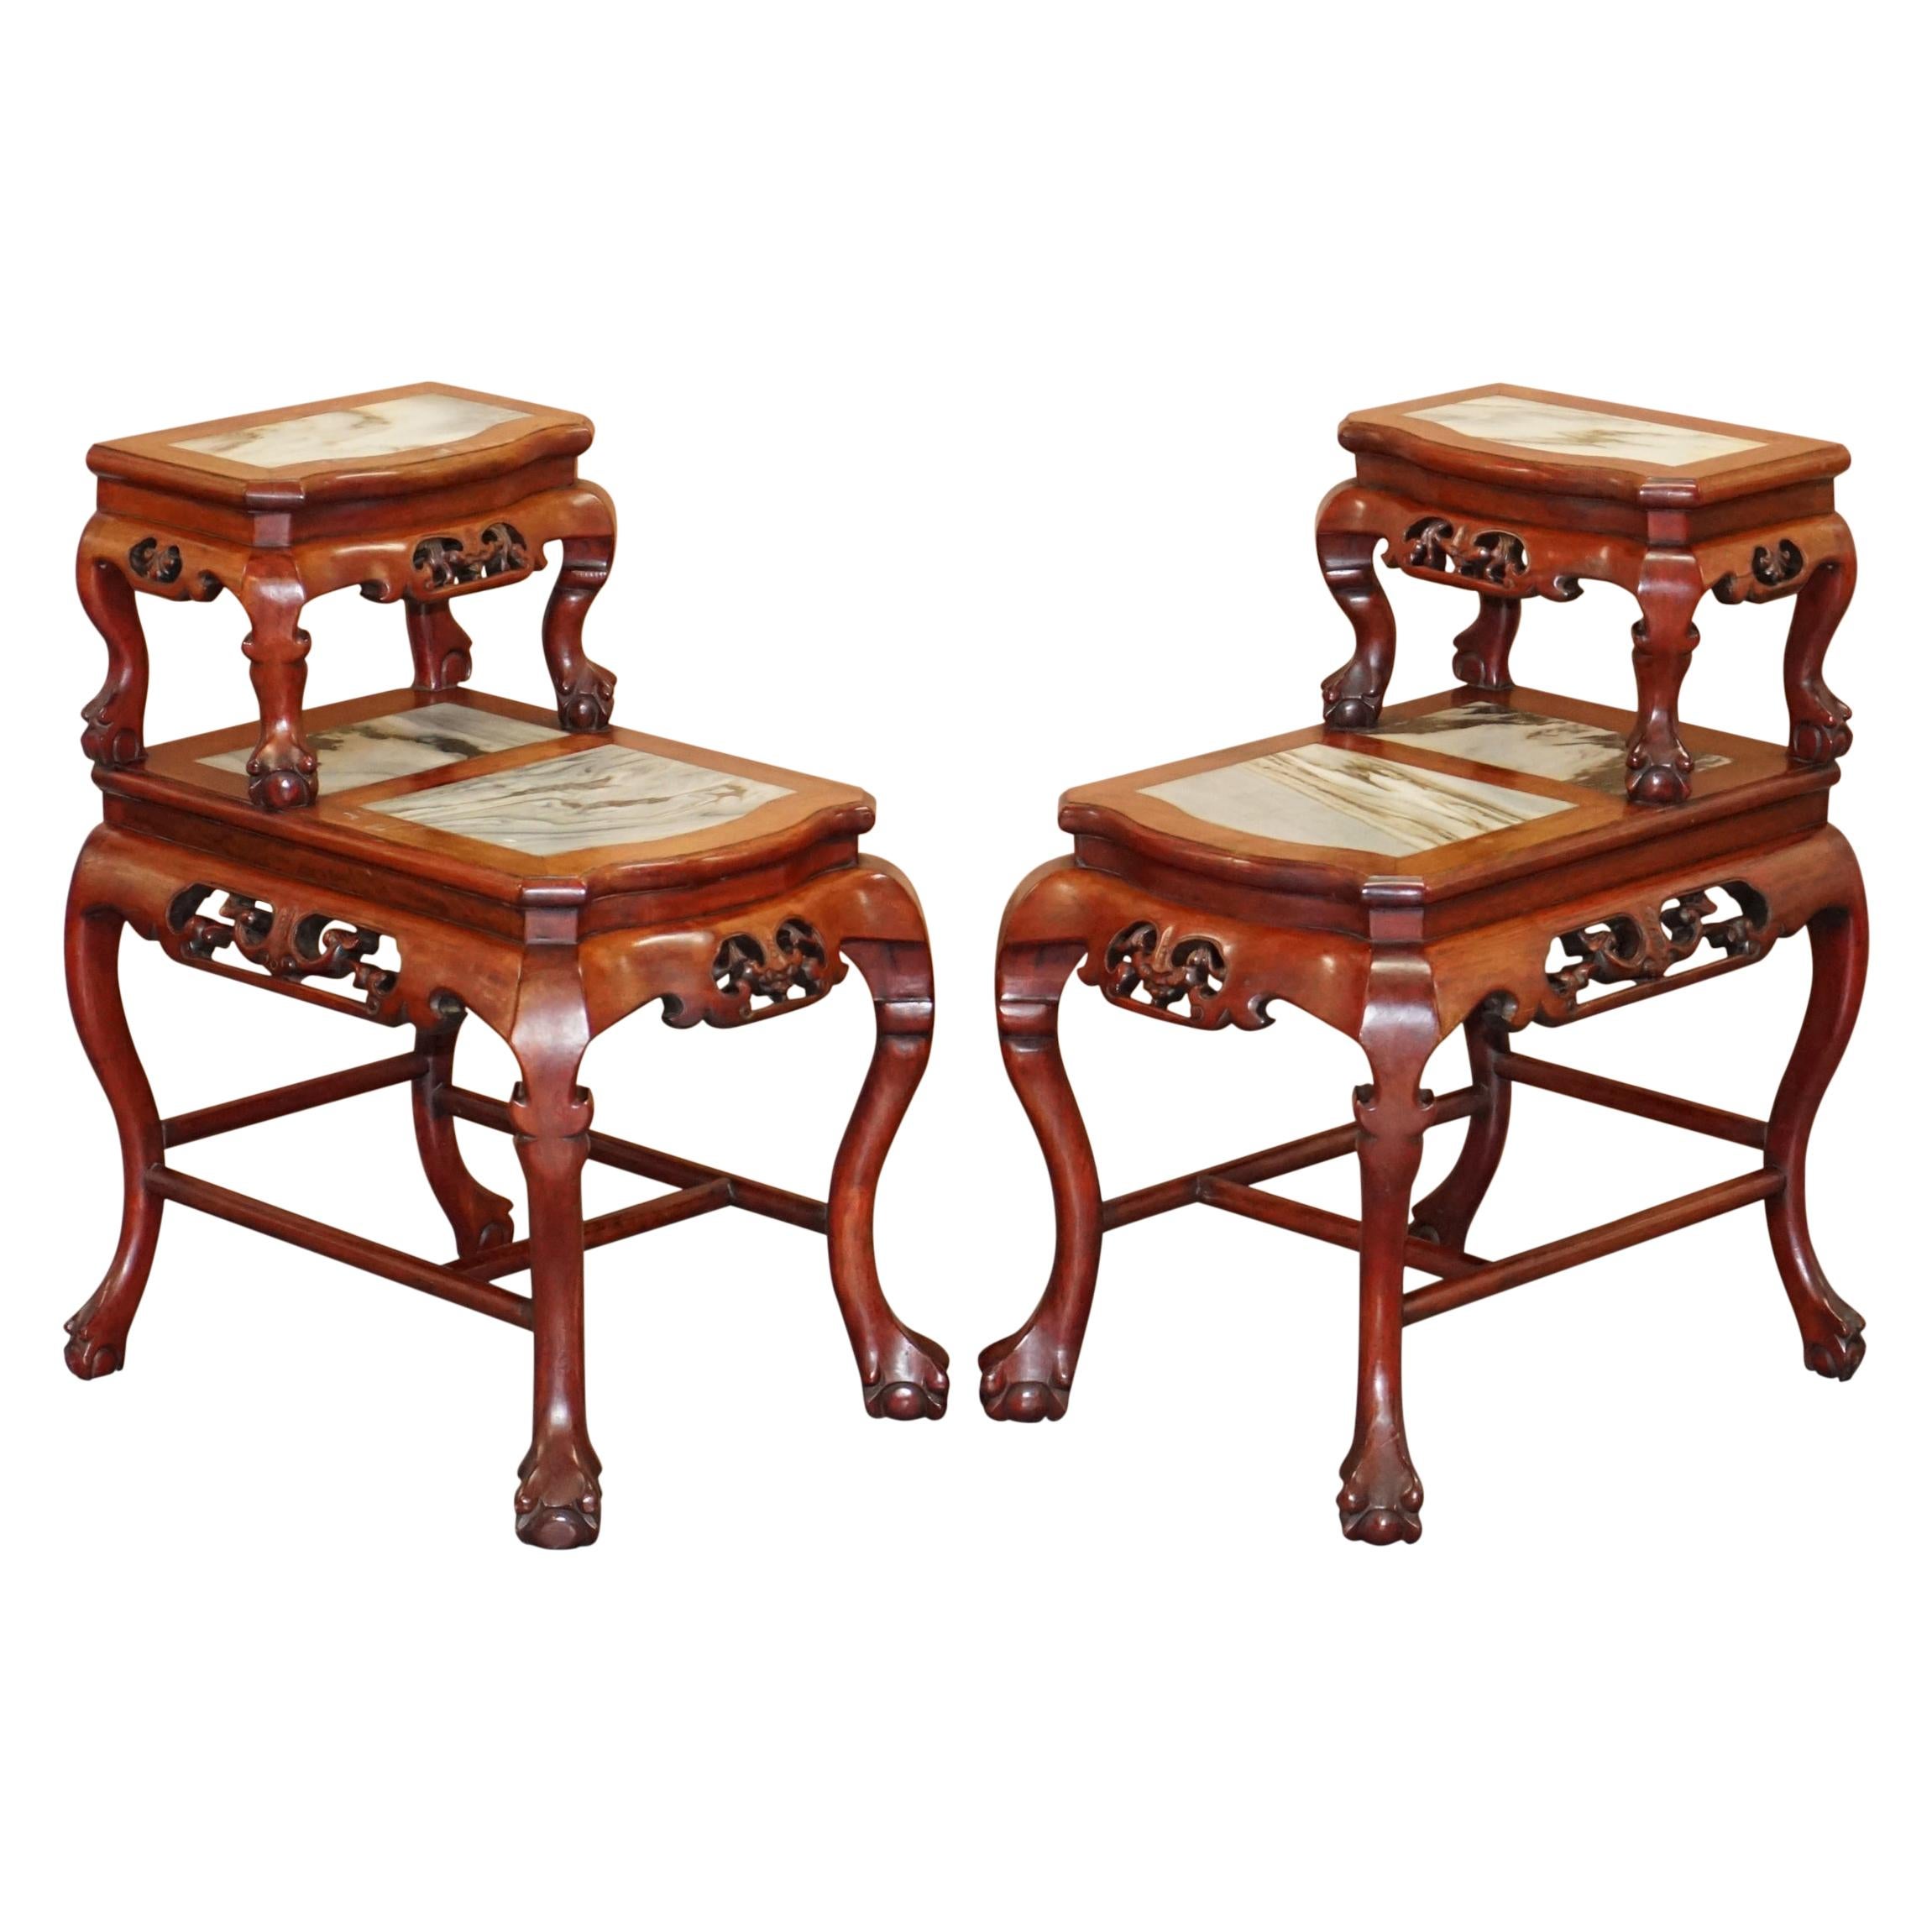 Pair of Chinese Hand Carved Hardwood Marble Side Tables with Claw and Ball Feet For Sale